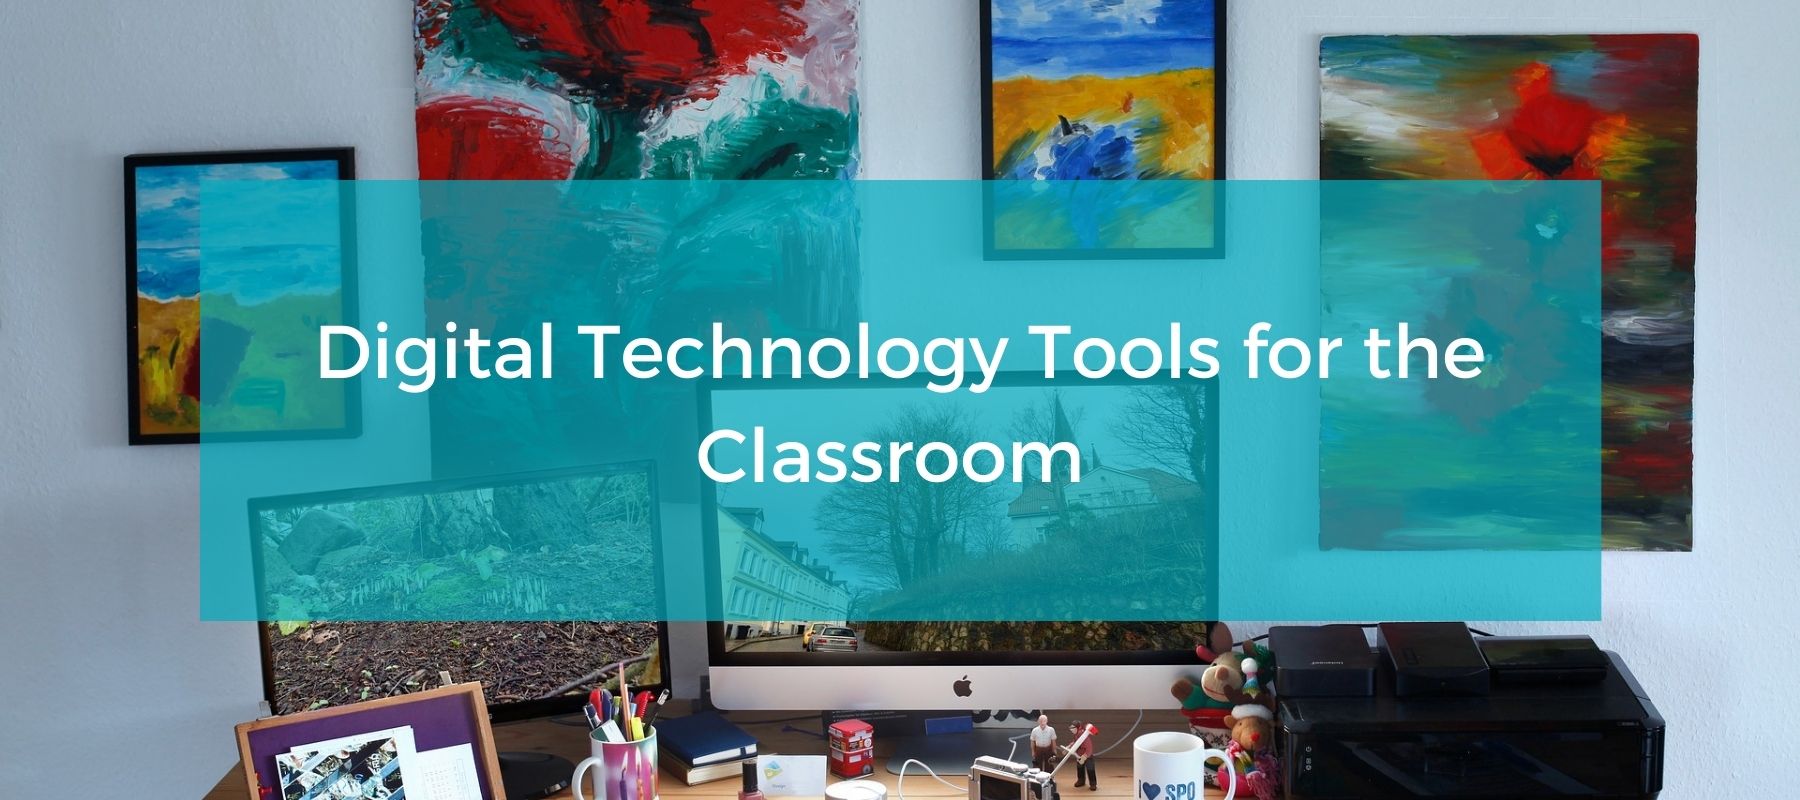 Digital Technology for the Classroom